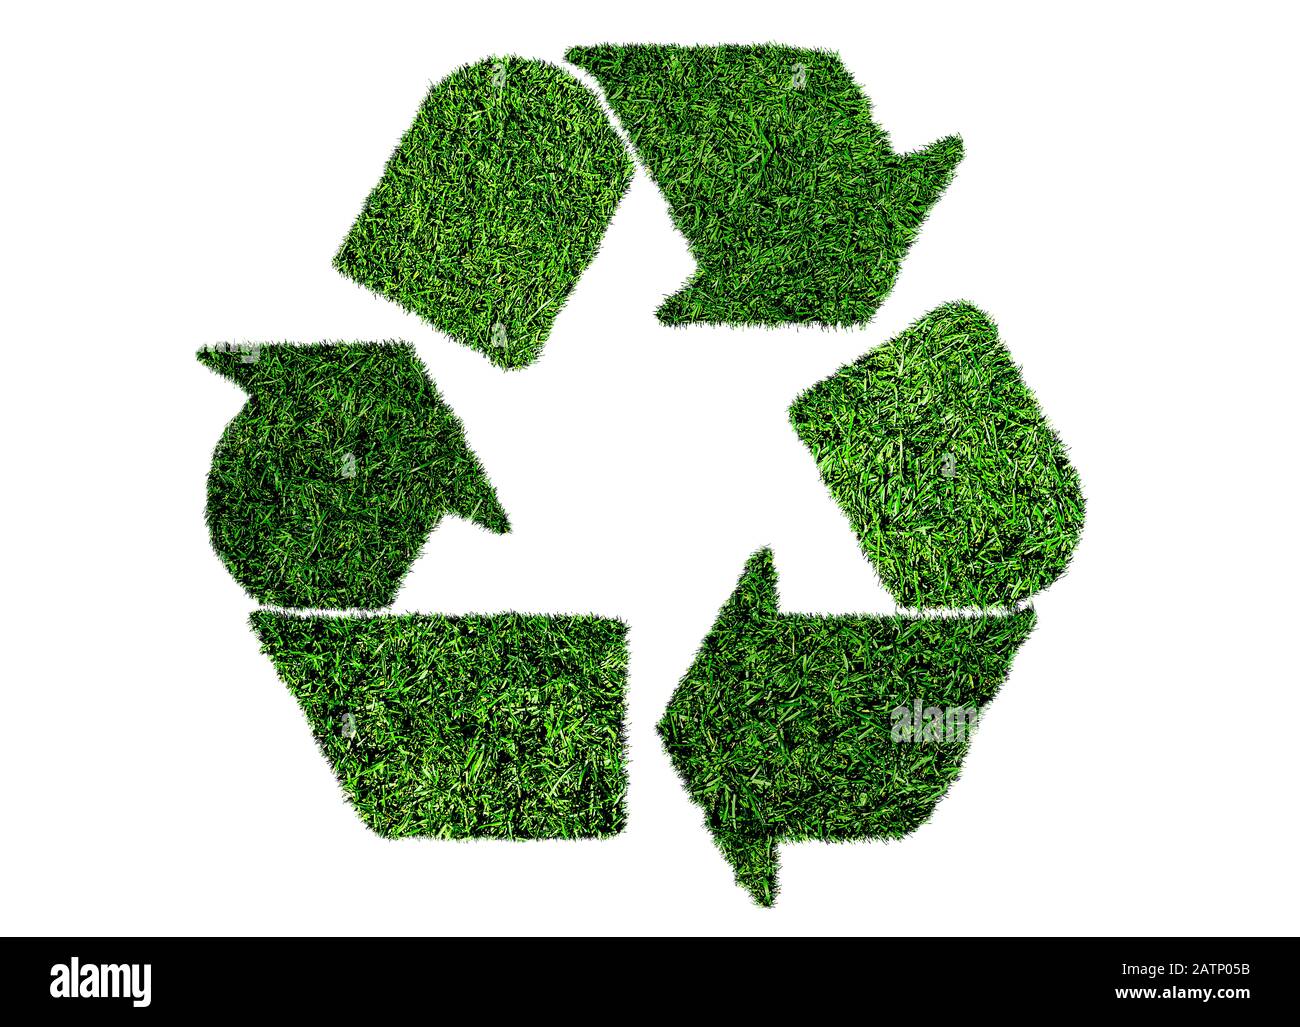 lush green grass recycling symbol, sustainability concept isolated on white background Stock Photo